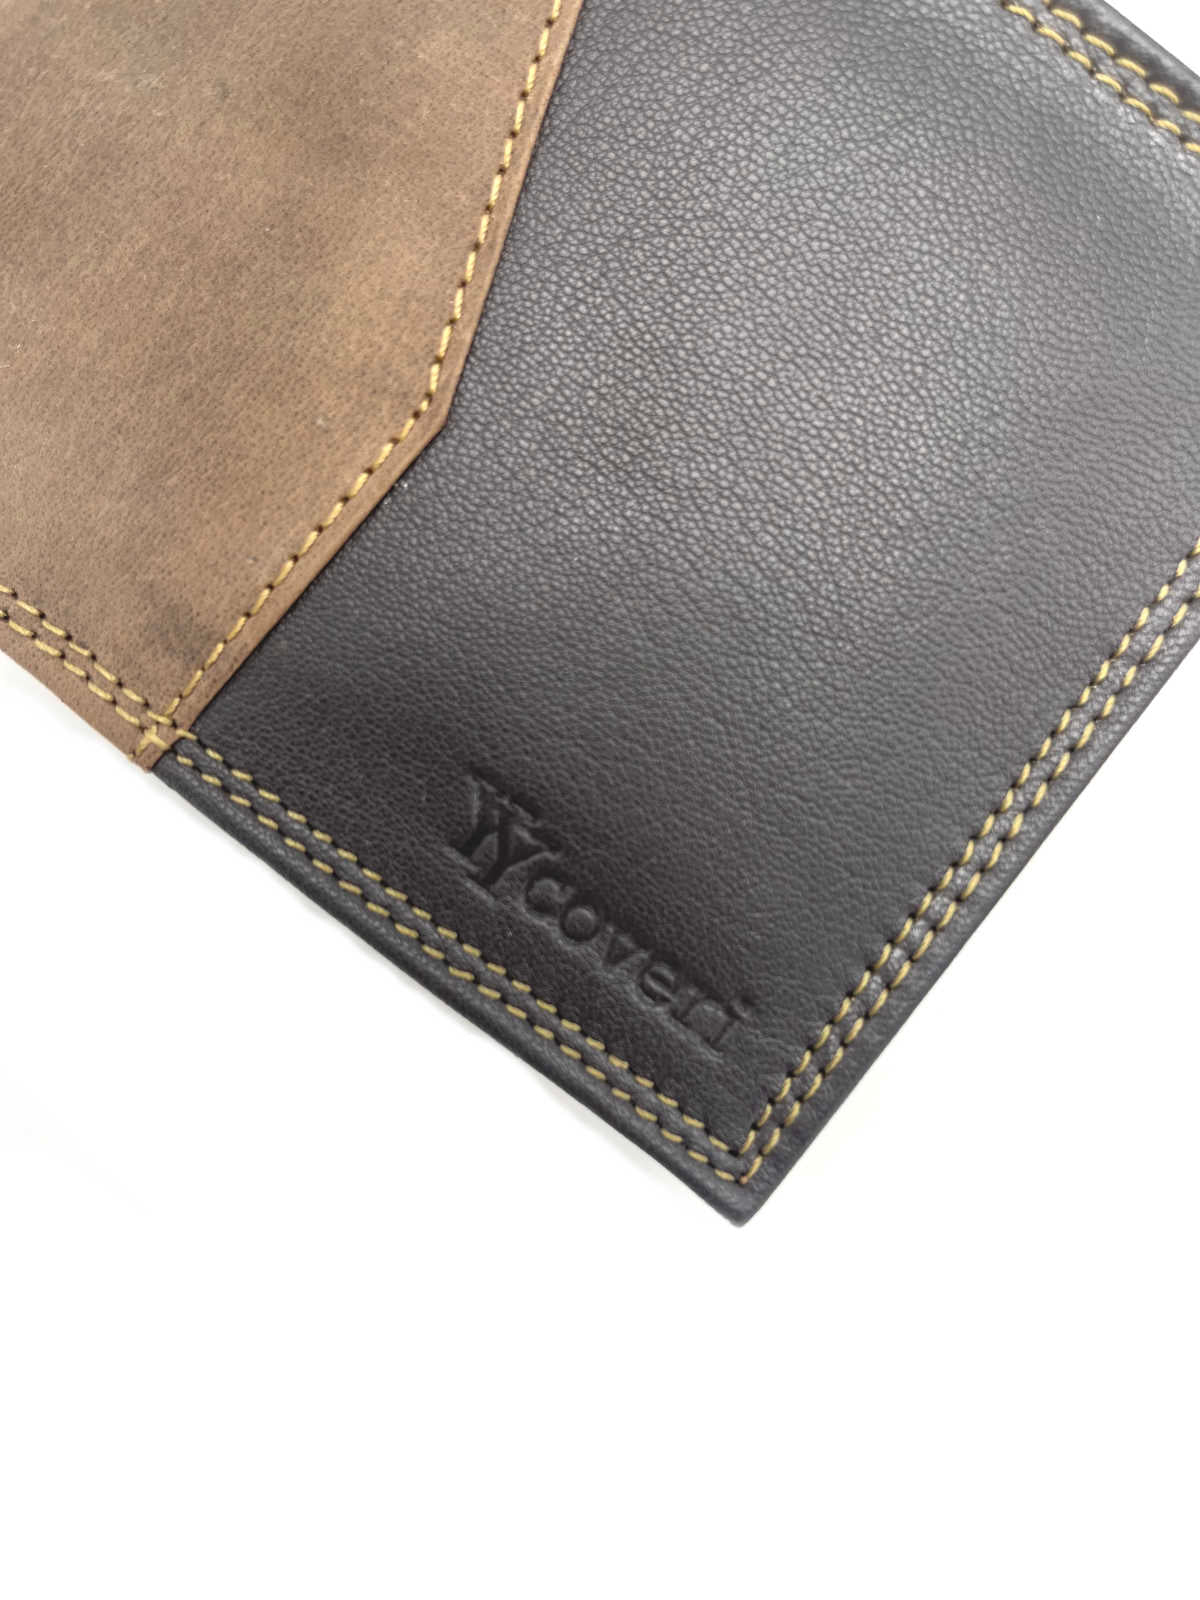 Genuine leather wallet for men, Brand You Young Coveri, art. NETT1144.422